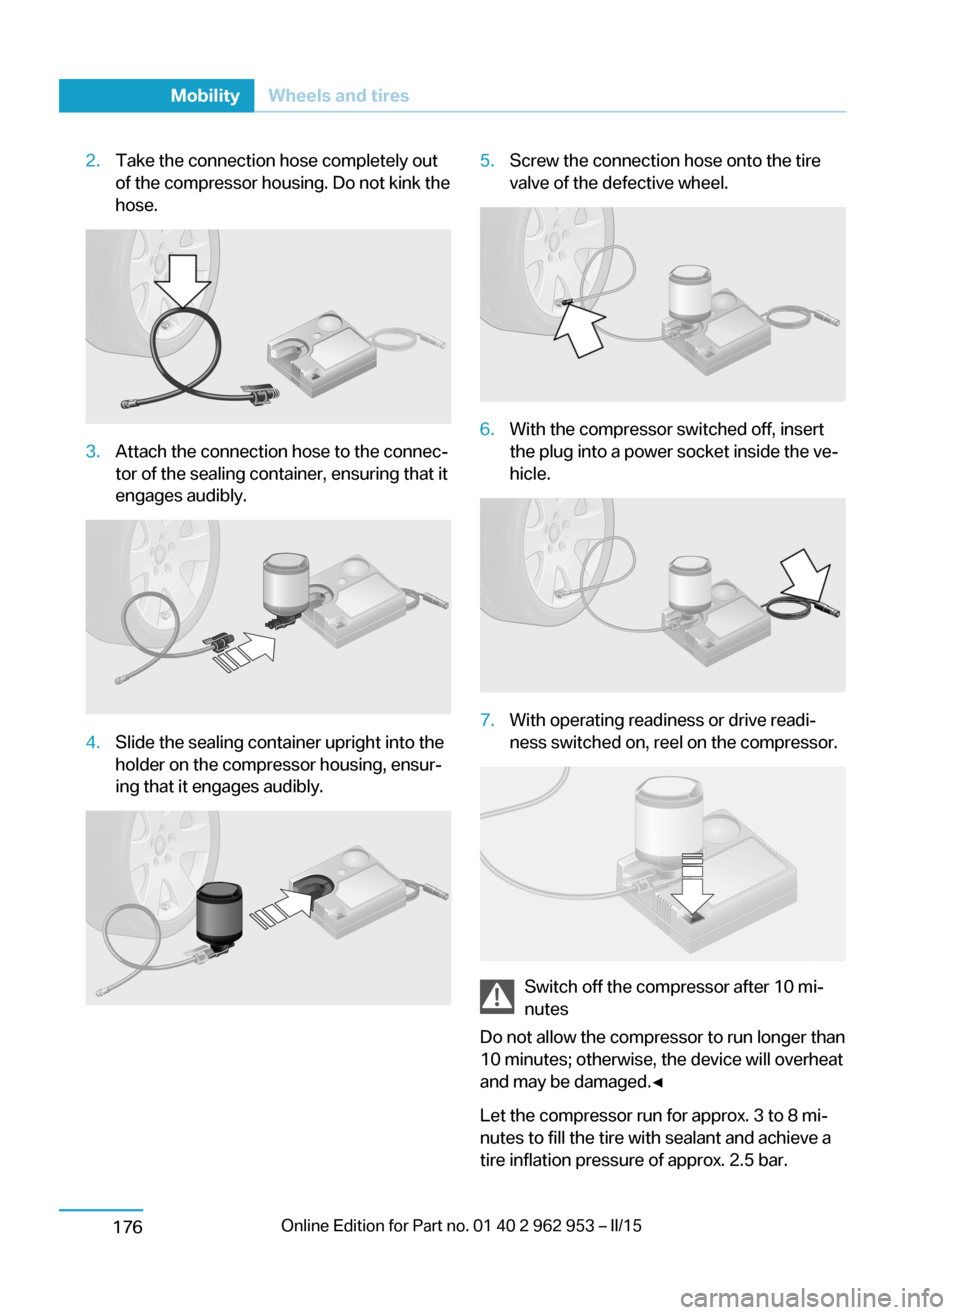 BMW I3 2014 I01 Owners Manual 2.Take the connection hose completely out
of the compressor housing. Do not kink the
hose.3.Attach the connection hose to the connec‐
tor of the sealing container, ensuring that it
engages audibly.4